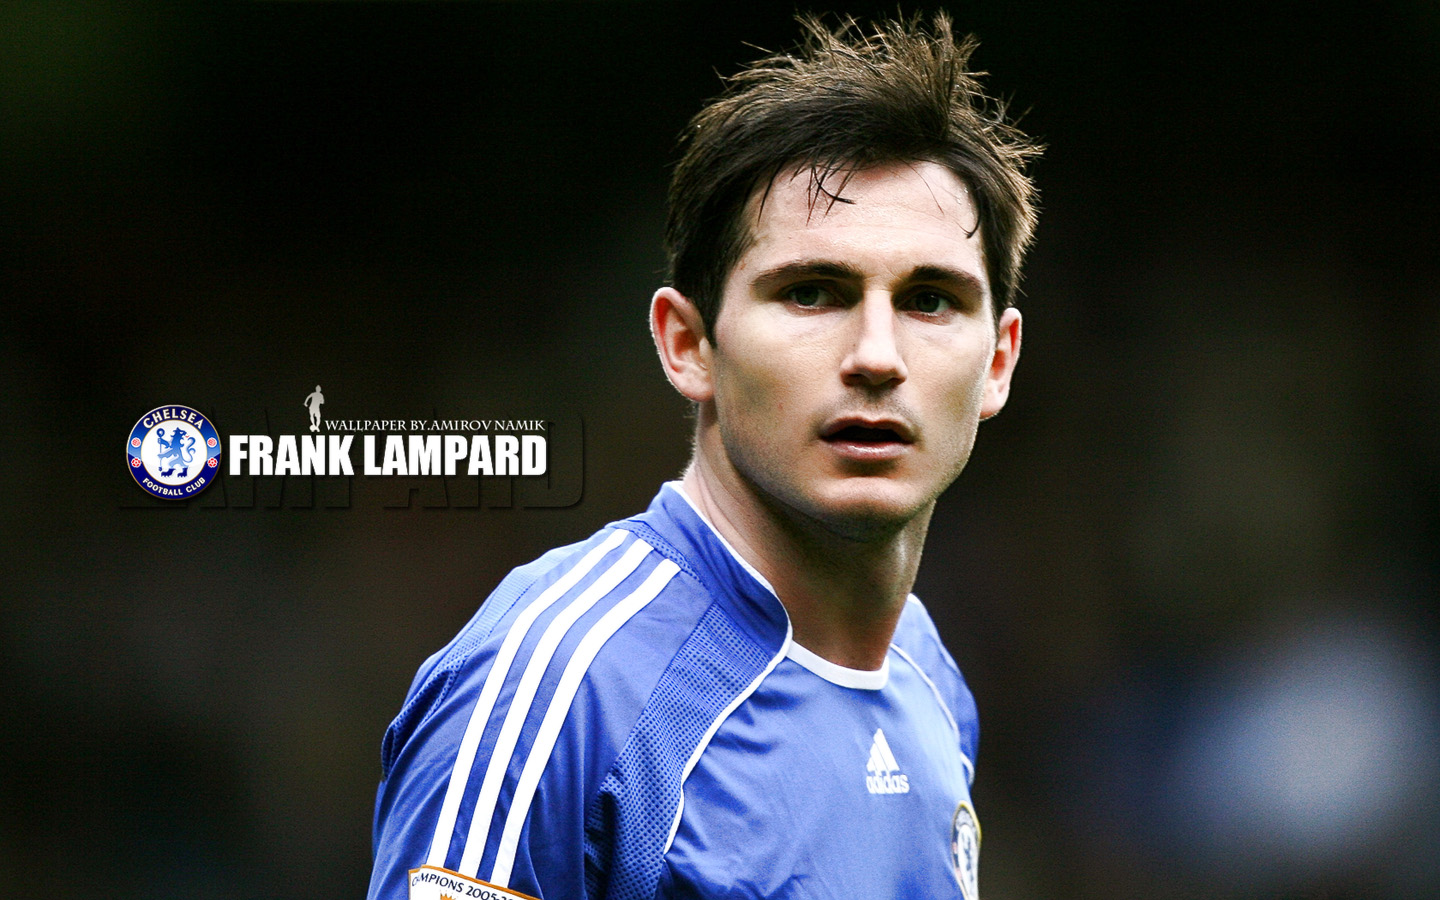 Frank Lampard Picture by Namik Amirov